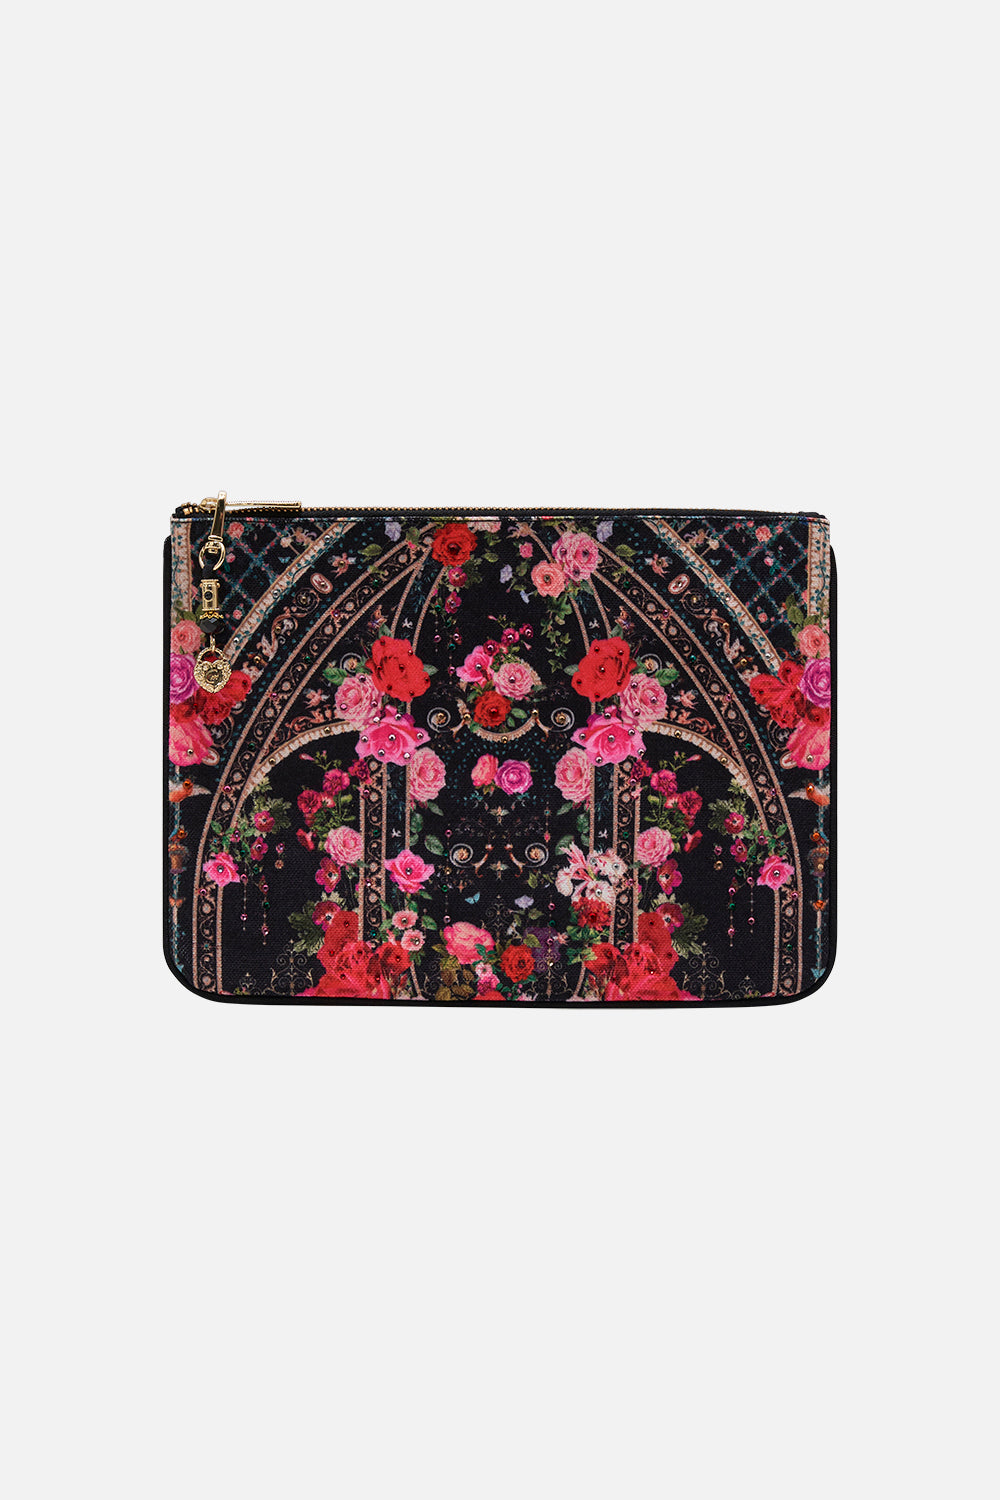 Product view of CAMILLA designer clutch bag in Reservation For Love print 